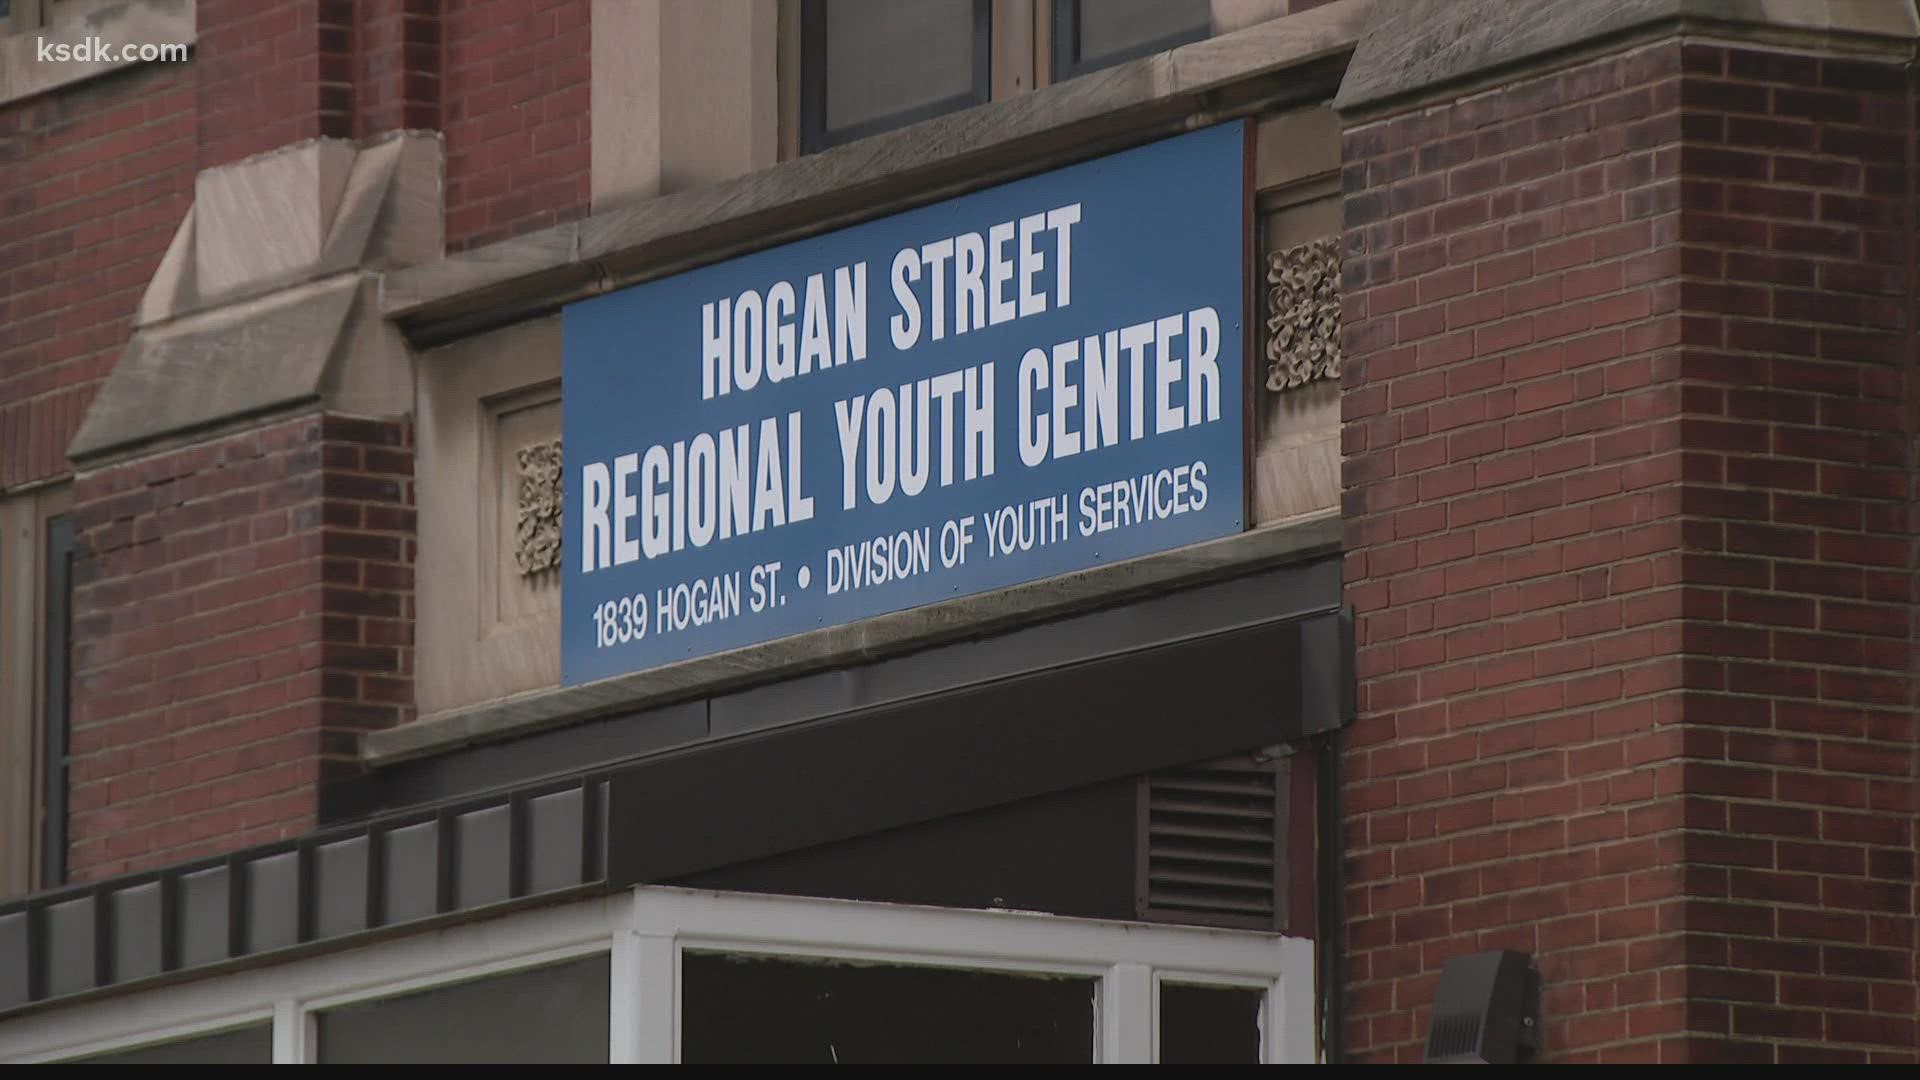 Eight teens were involved in a disturbance at the Juvenile Detention Center along Hogan Street, which included injuries to at least one of the youth leaders.